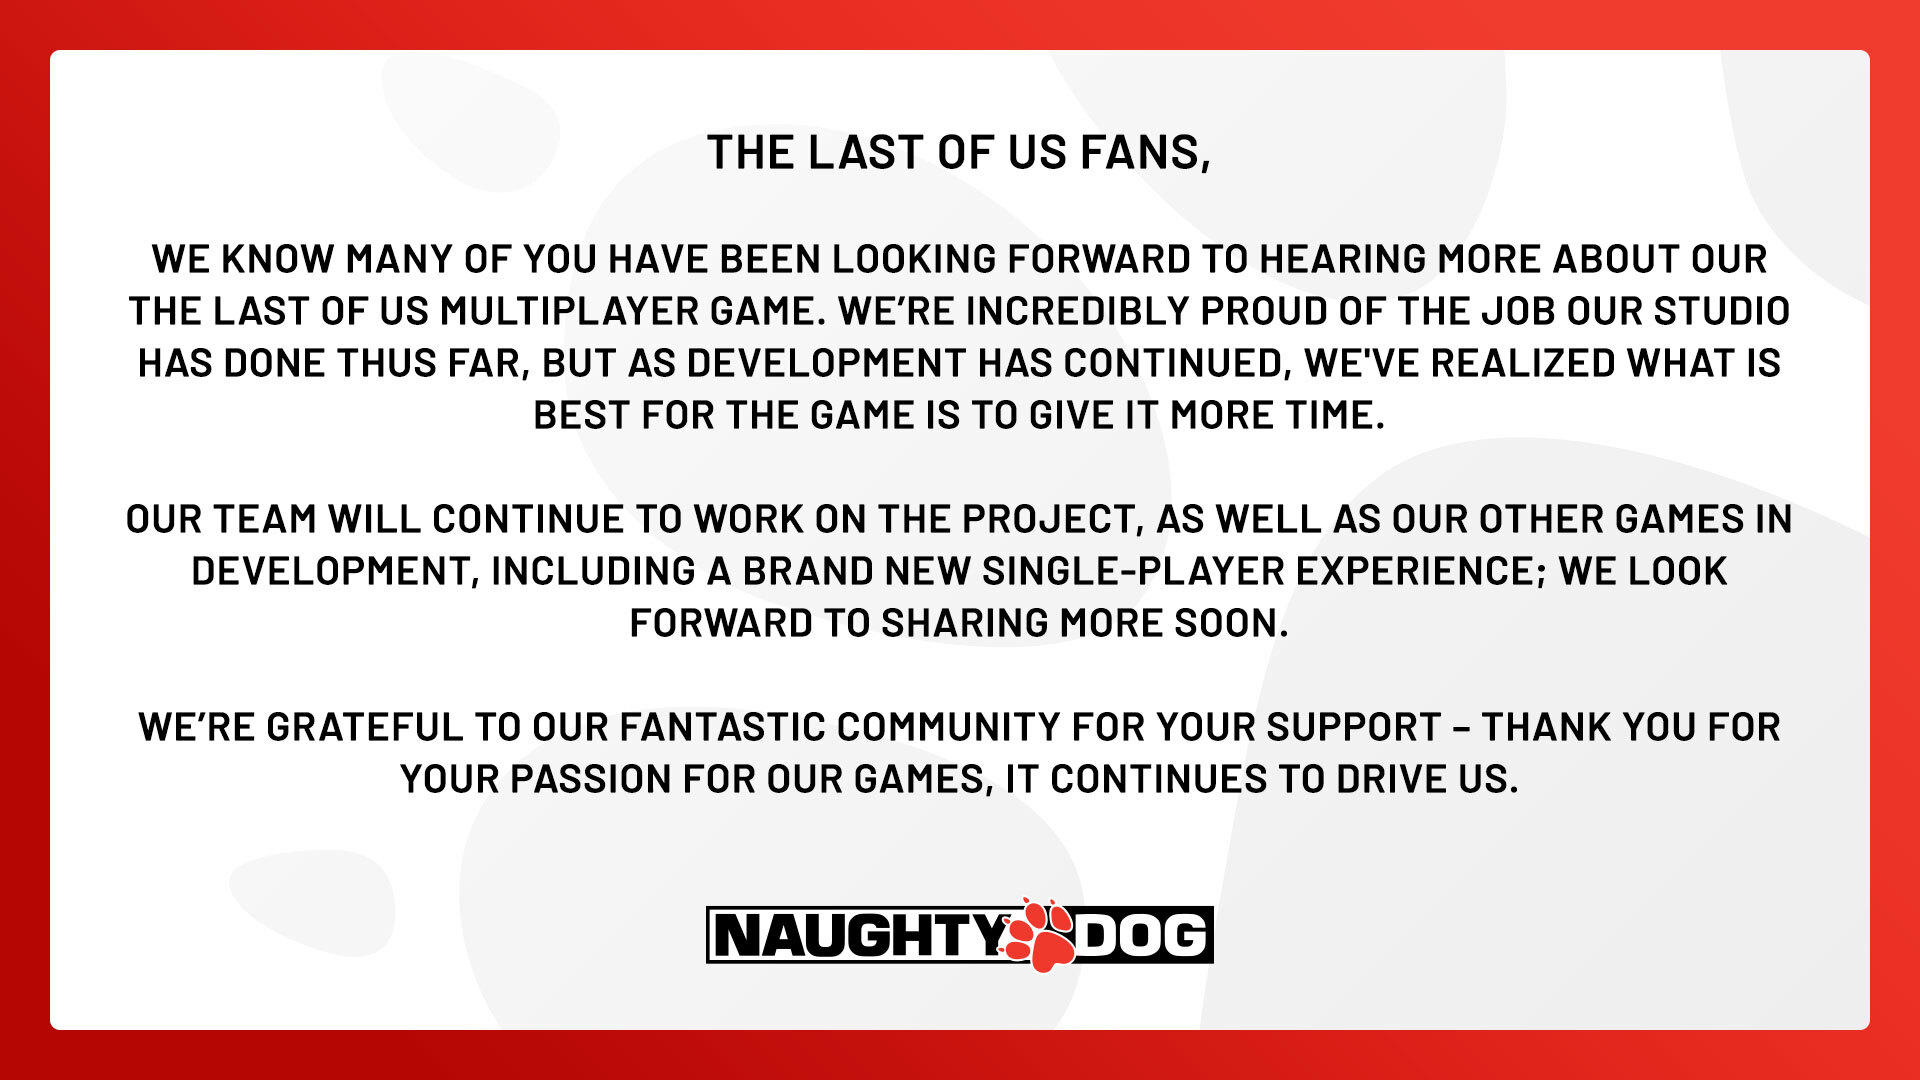 The Last of Us multiplayer game delay announcement